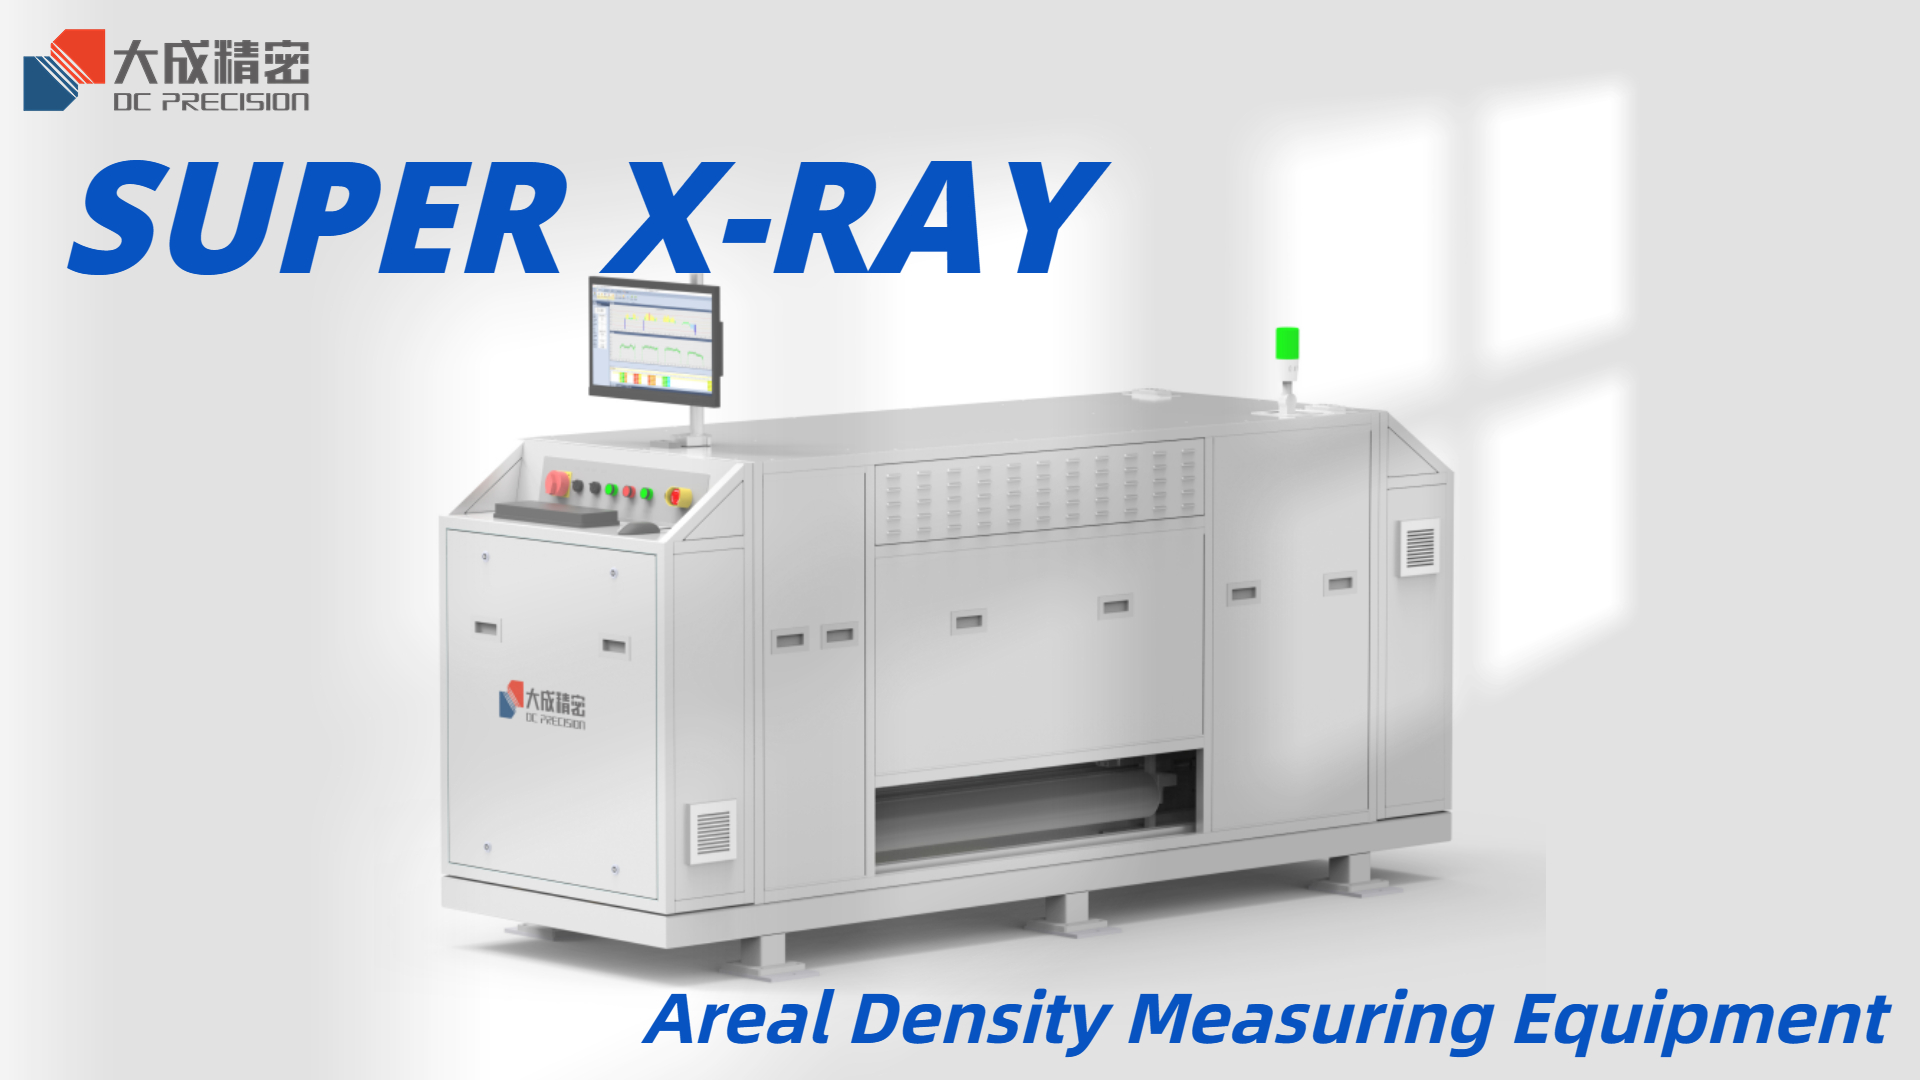 New Product Has Been Developed! Super X-Ray Areal Density Measuring Equipment—Ultra High Speed Scanning!